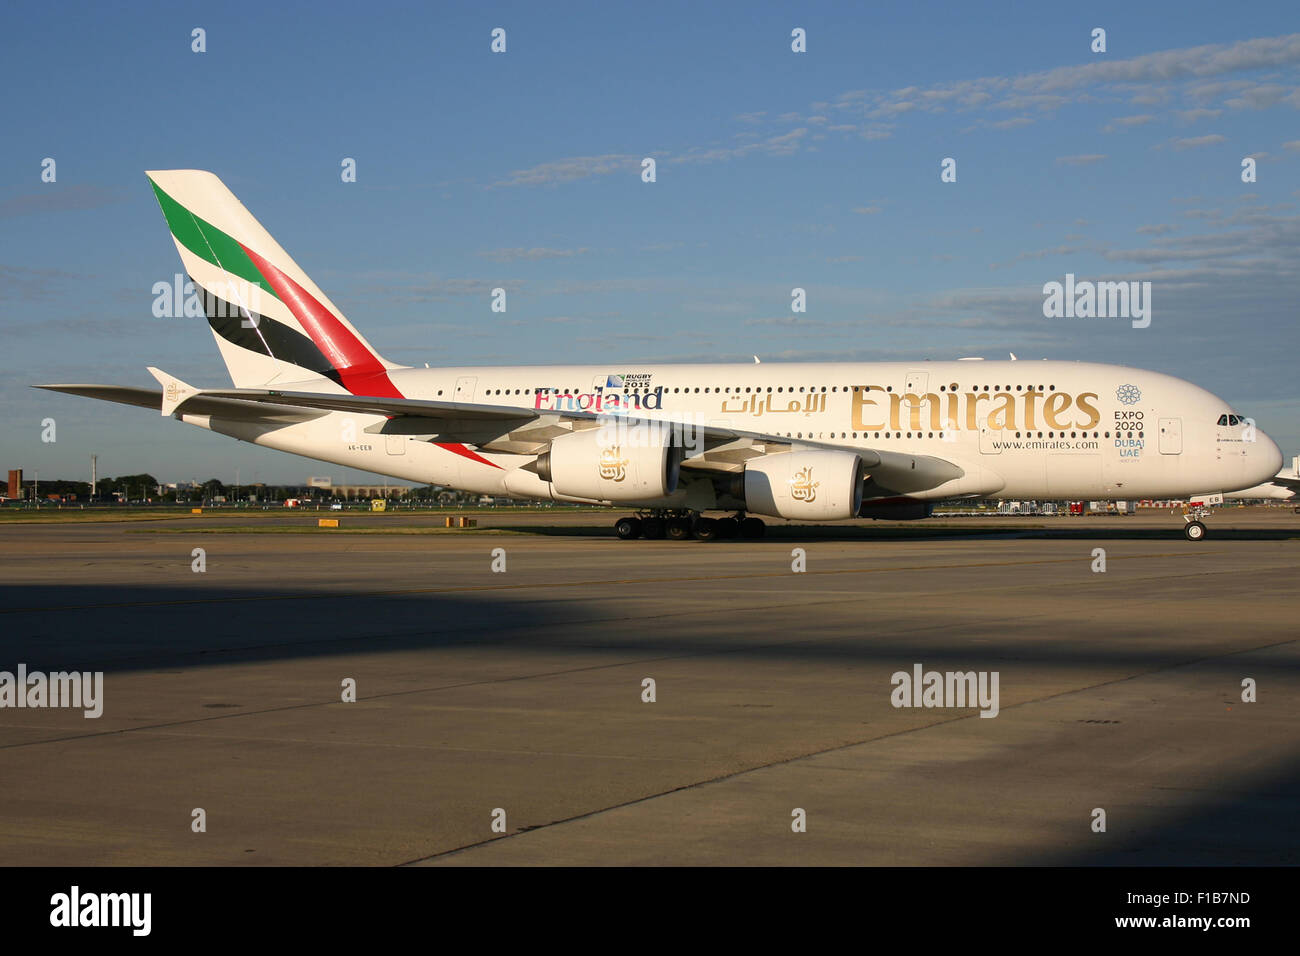 EMIRATES ENGLAND RUGBY 2015 CUP A380 Stock Photo